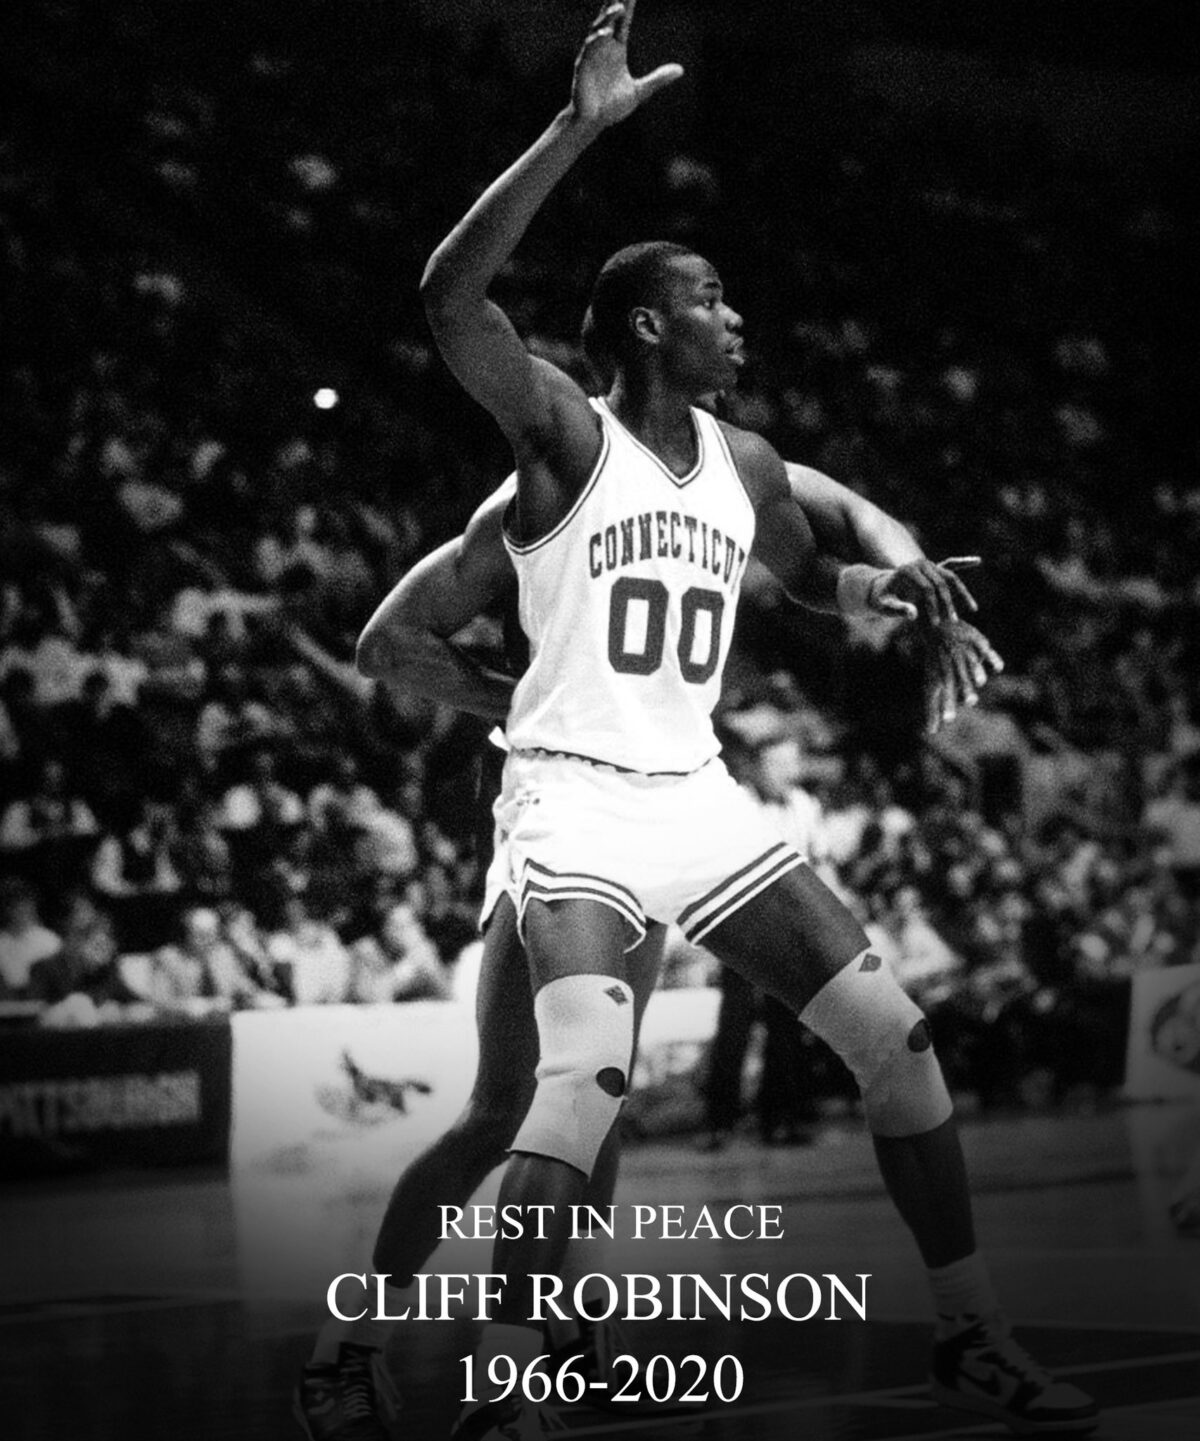 UConn great Cliff Robinson passes away at 53 | Zagsblog